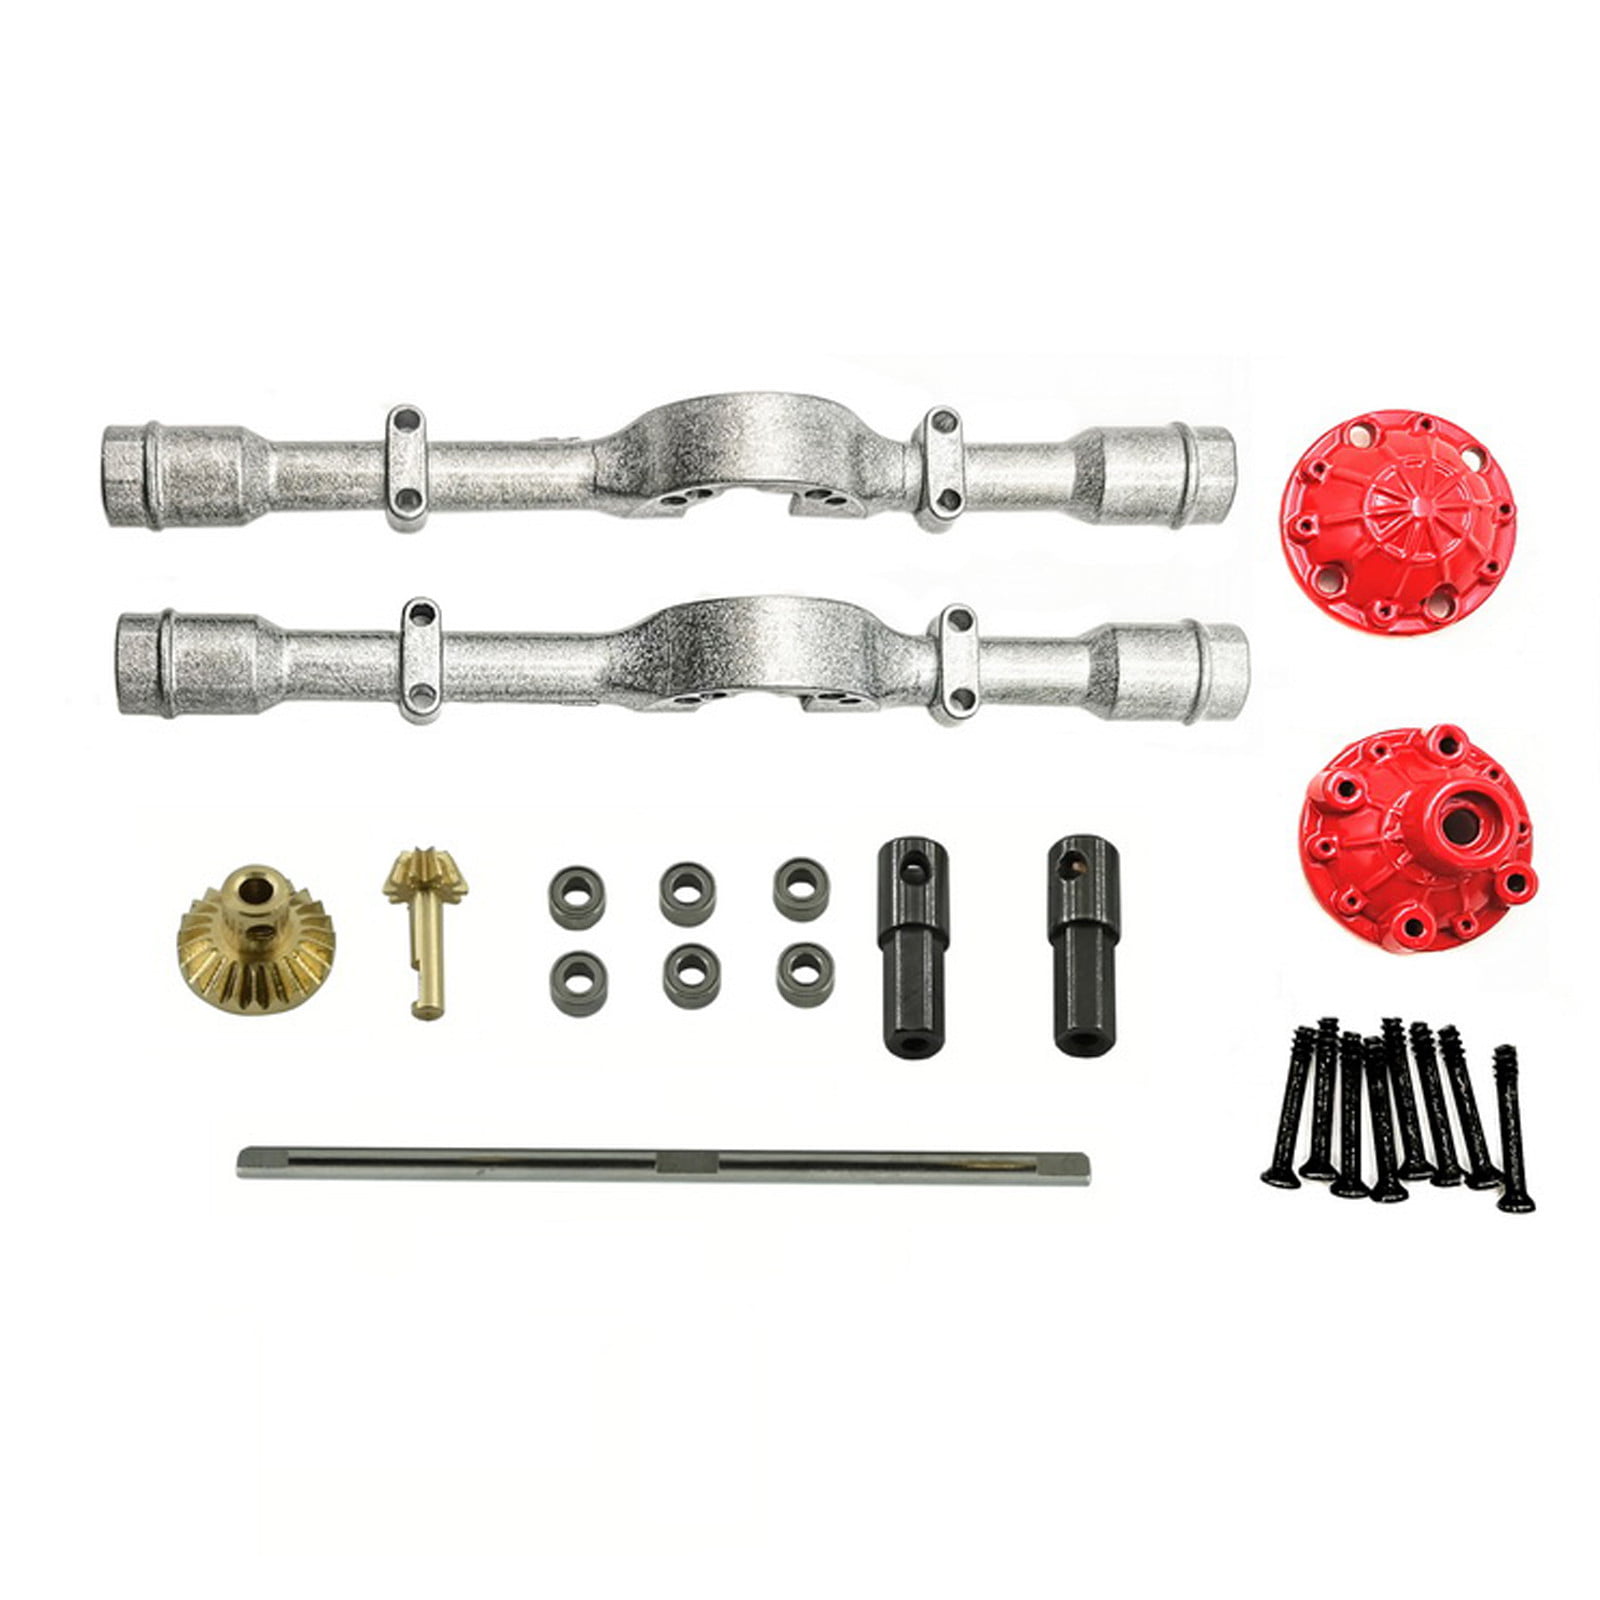 Metal Rear Axle Kits Set Replacement Parts Fit for WPL D12 RC Truck Accessories for sale online